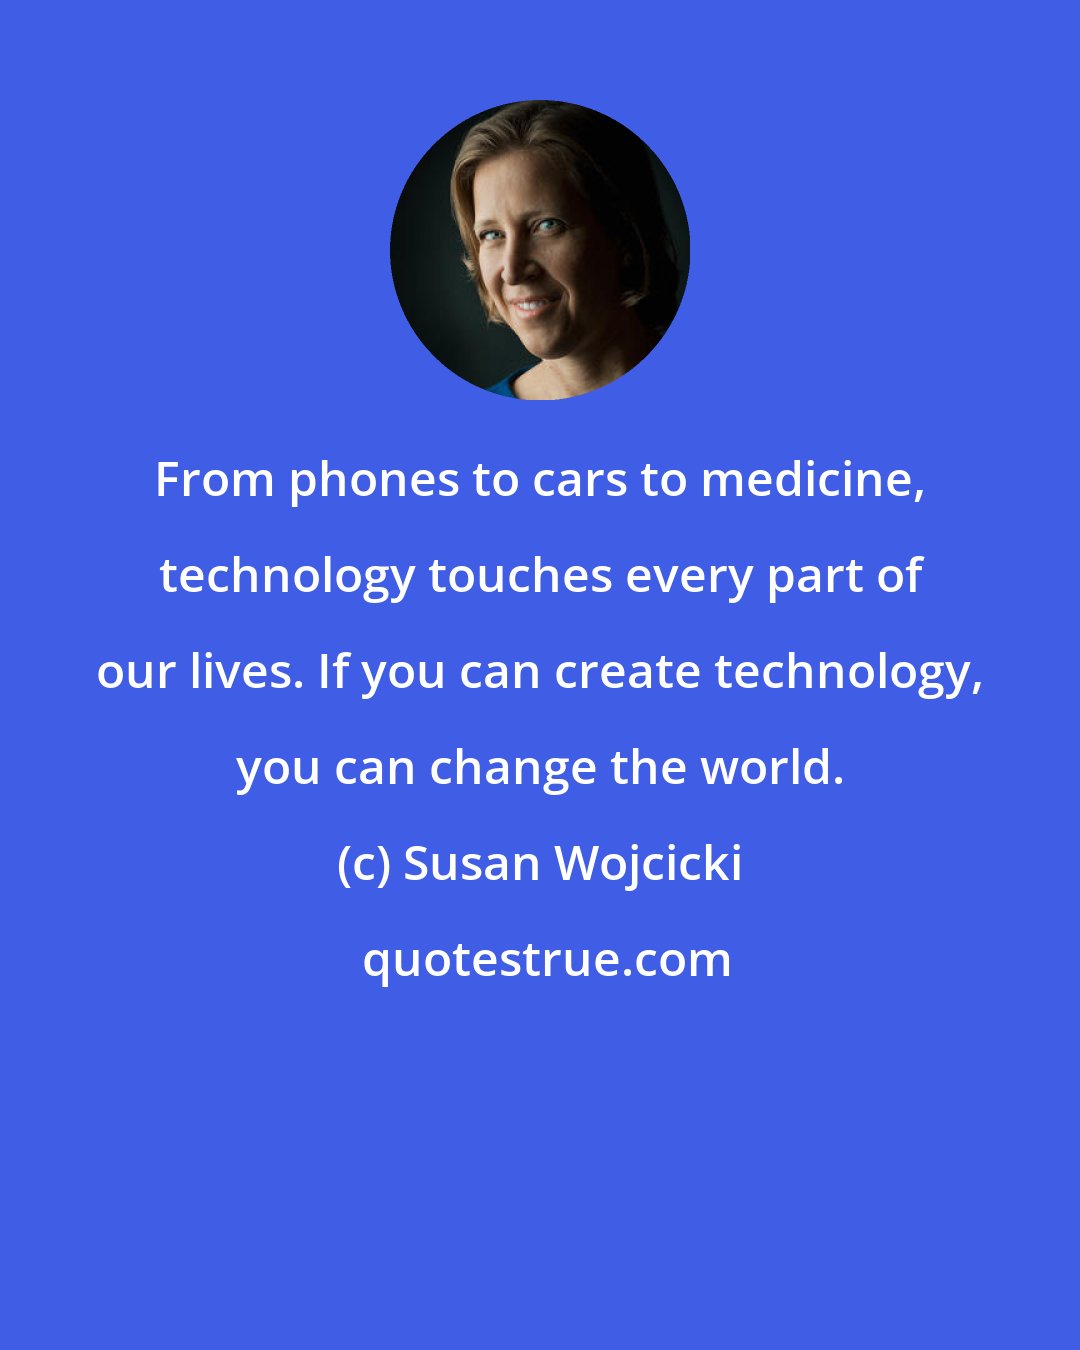 Susan Wojcicki: From phones to cars to medicine, technology touches every part of our lives. If you can create technology, you can change the world.